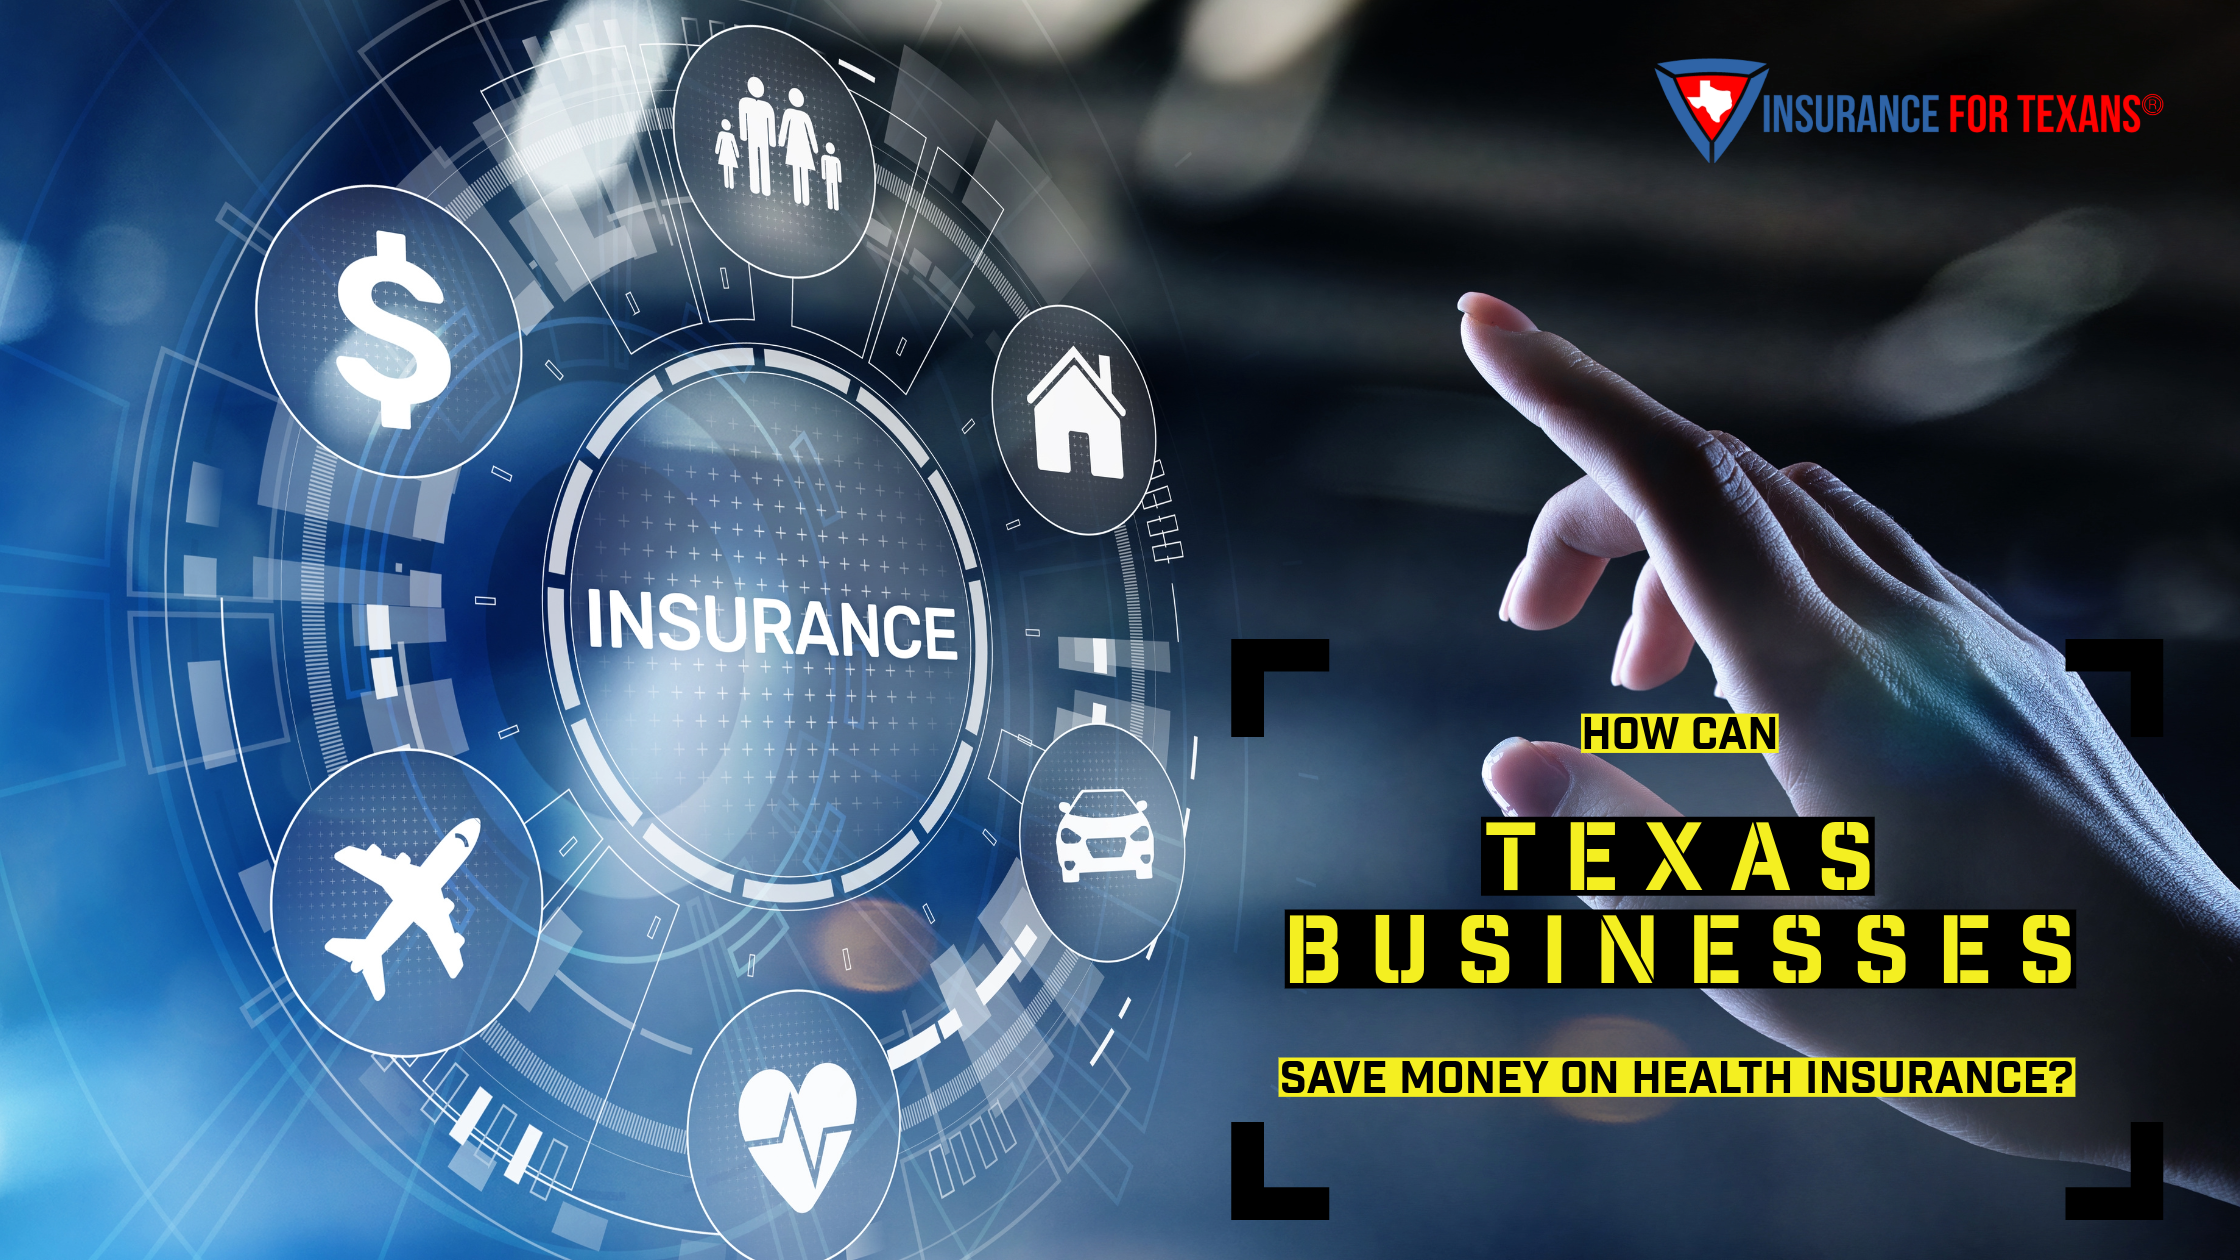 How Can Texas Businesses Save Money On Health Insurance Costs